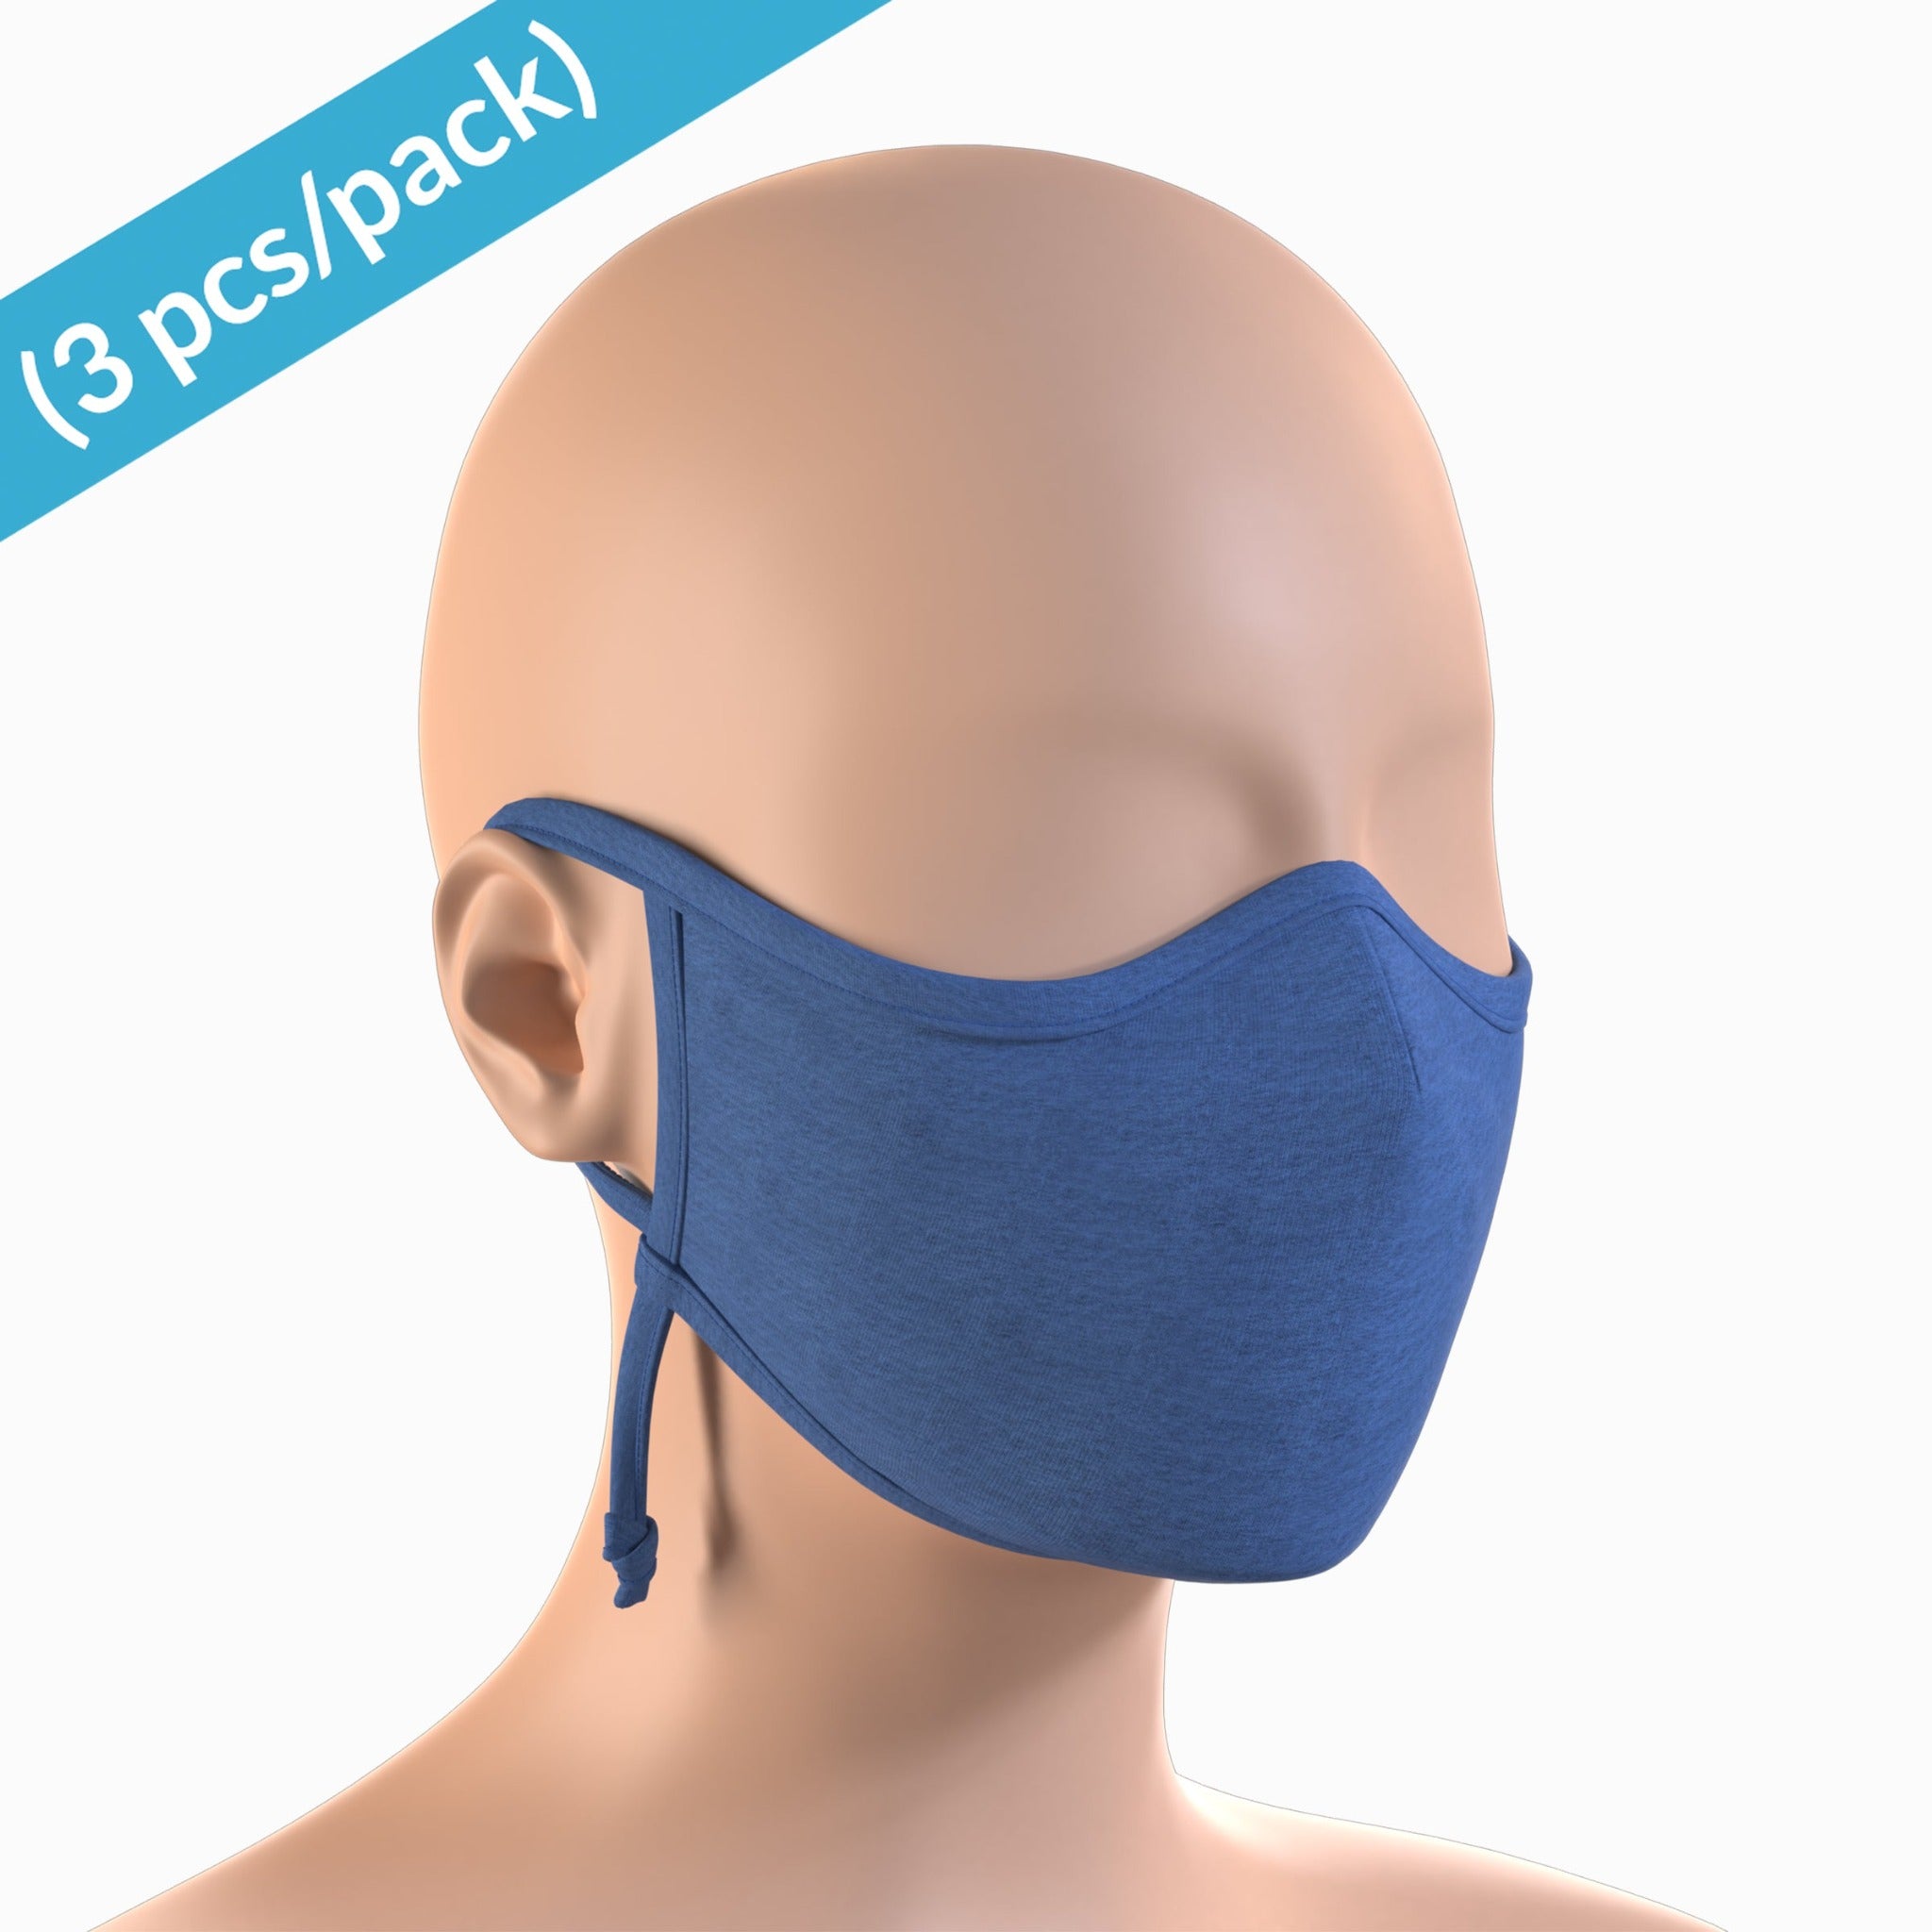 Cottonique Hypoallergenic Face Mask with Adjustable Earloops Made